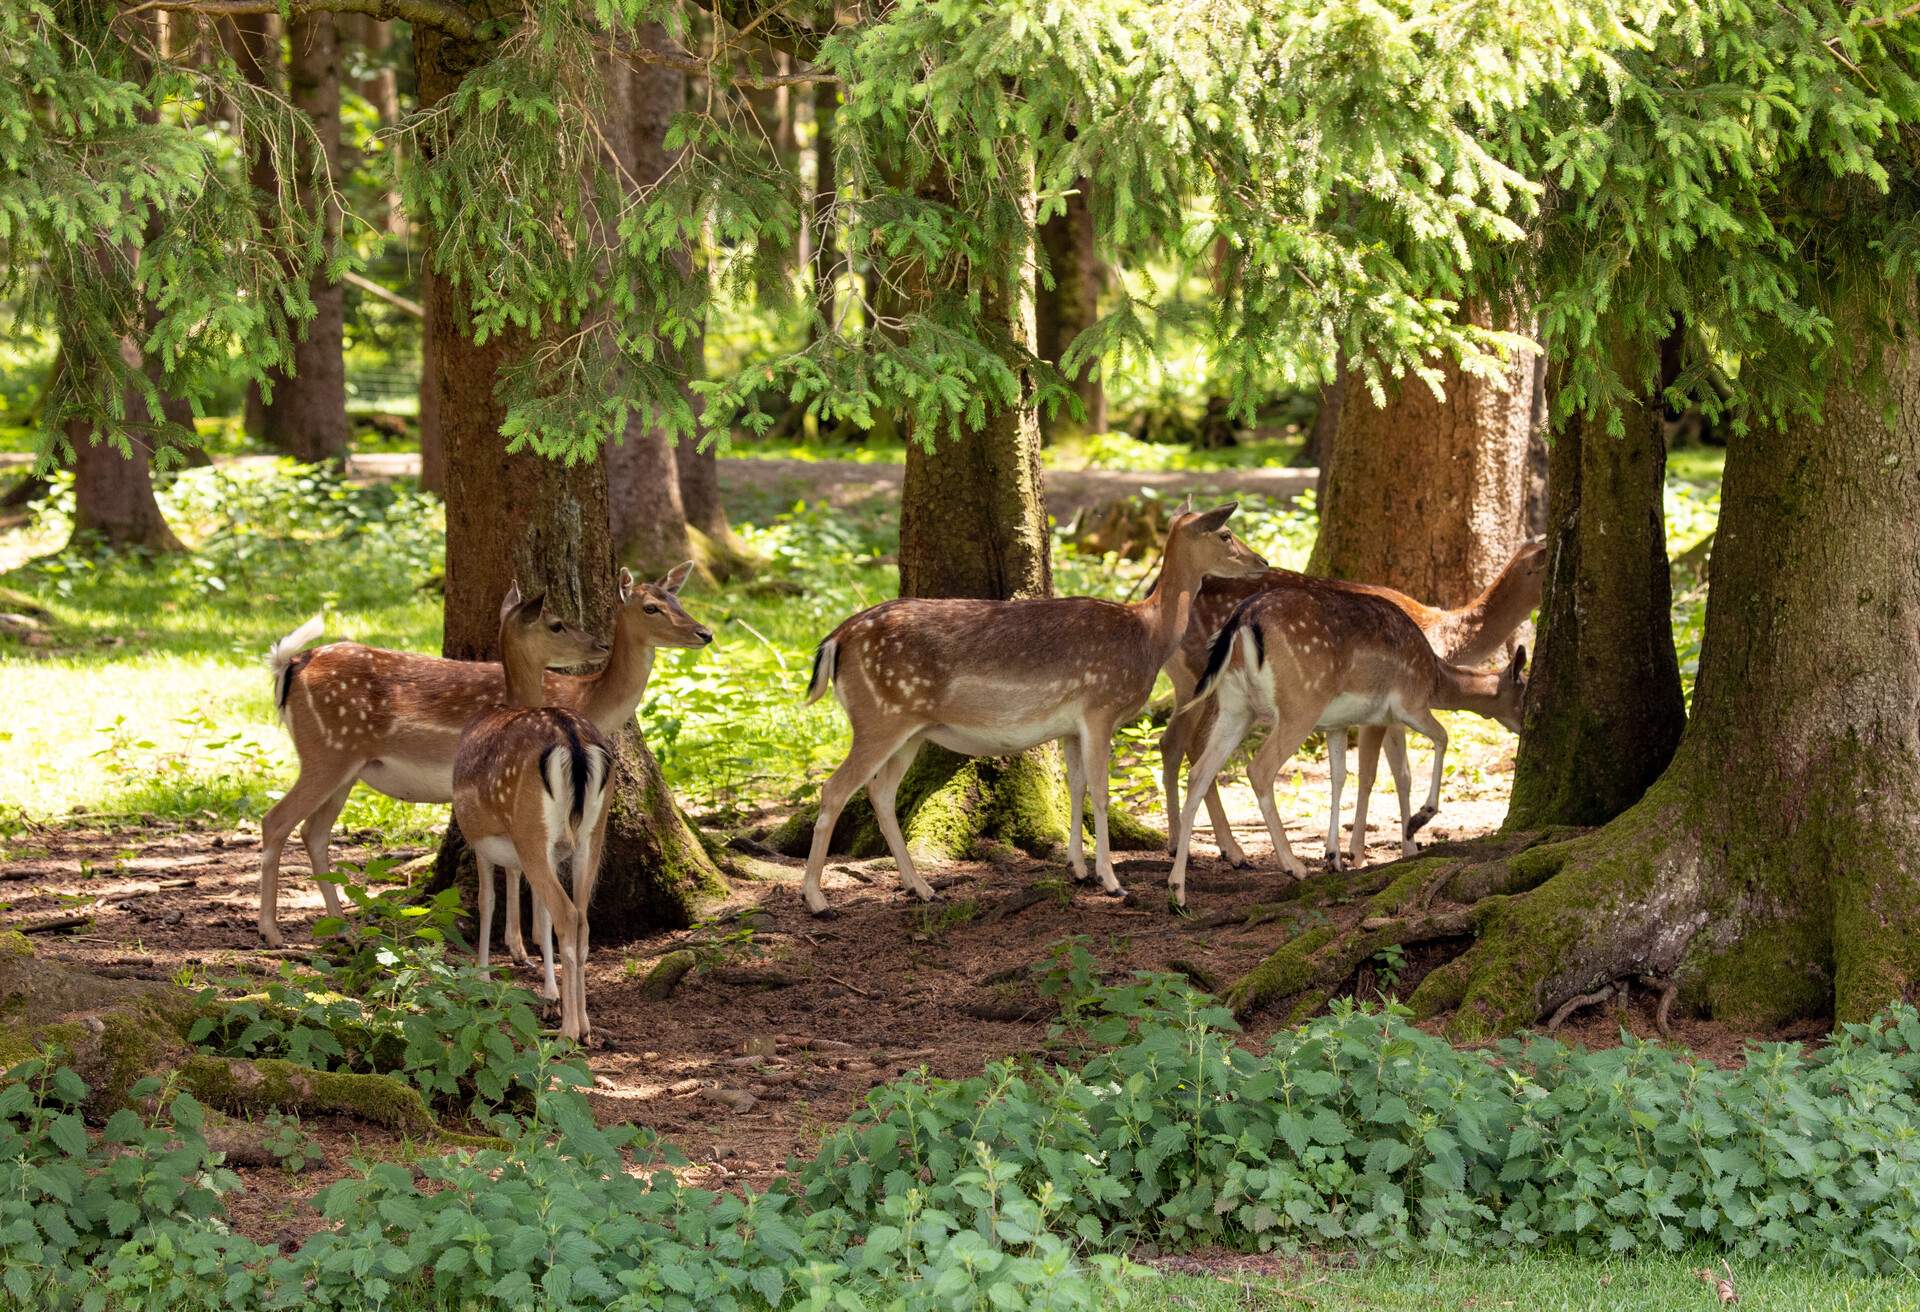 Deers in nature, at the Aying Bergtierpark, Germany.